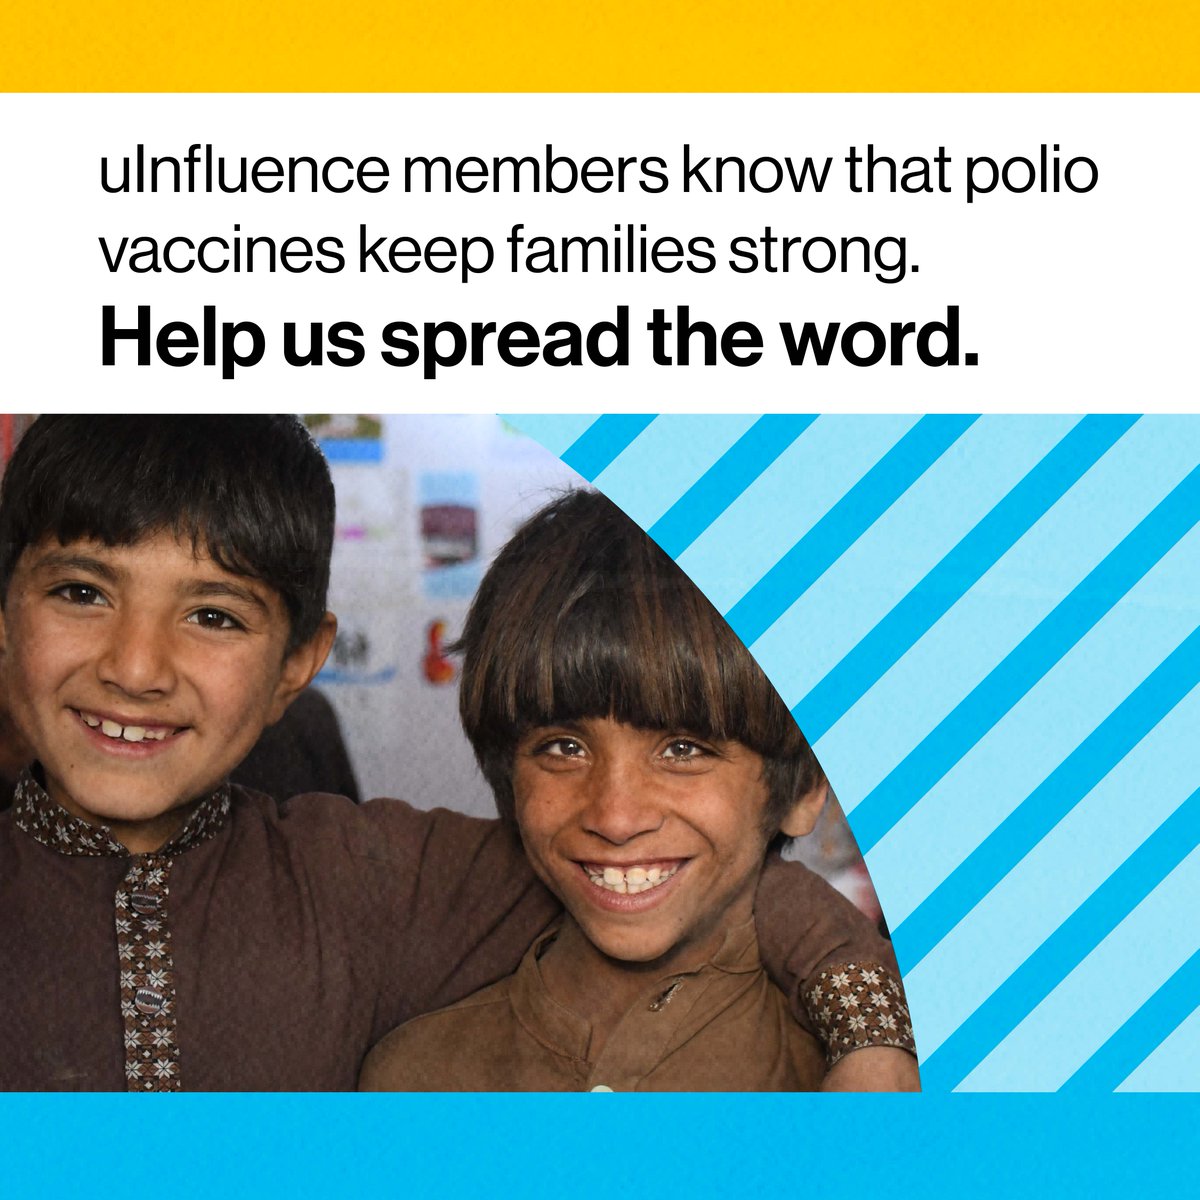 For International Day of Families, let’s share accurate health information to protect our children. Tell your followers that polio vaccination is the best and only way to protect kids from polio. If every child receives multiple doses, our families can stay protected.